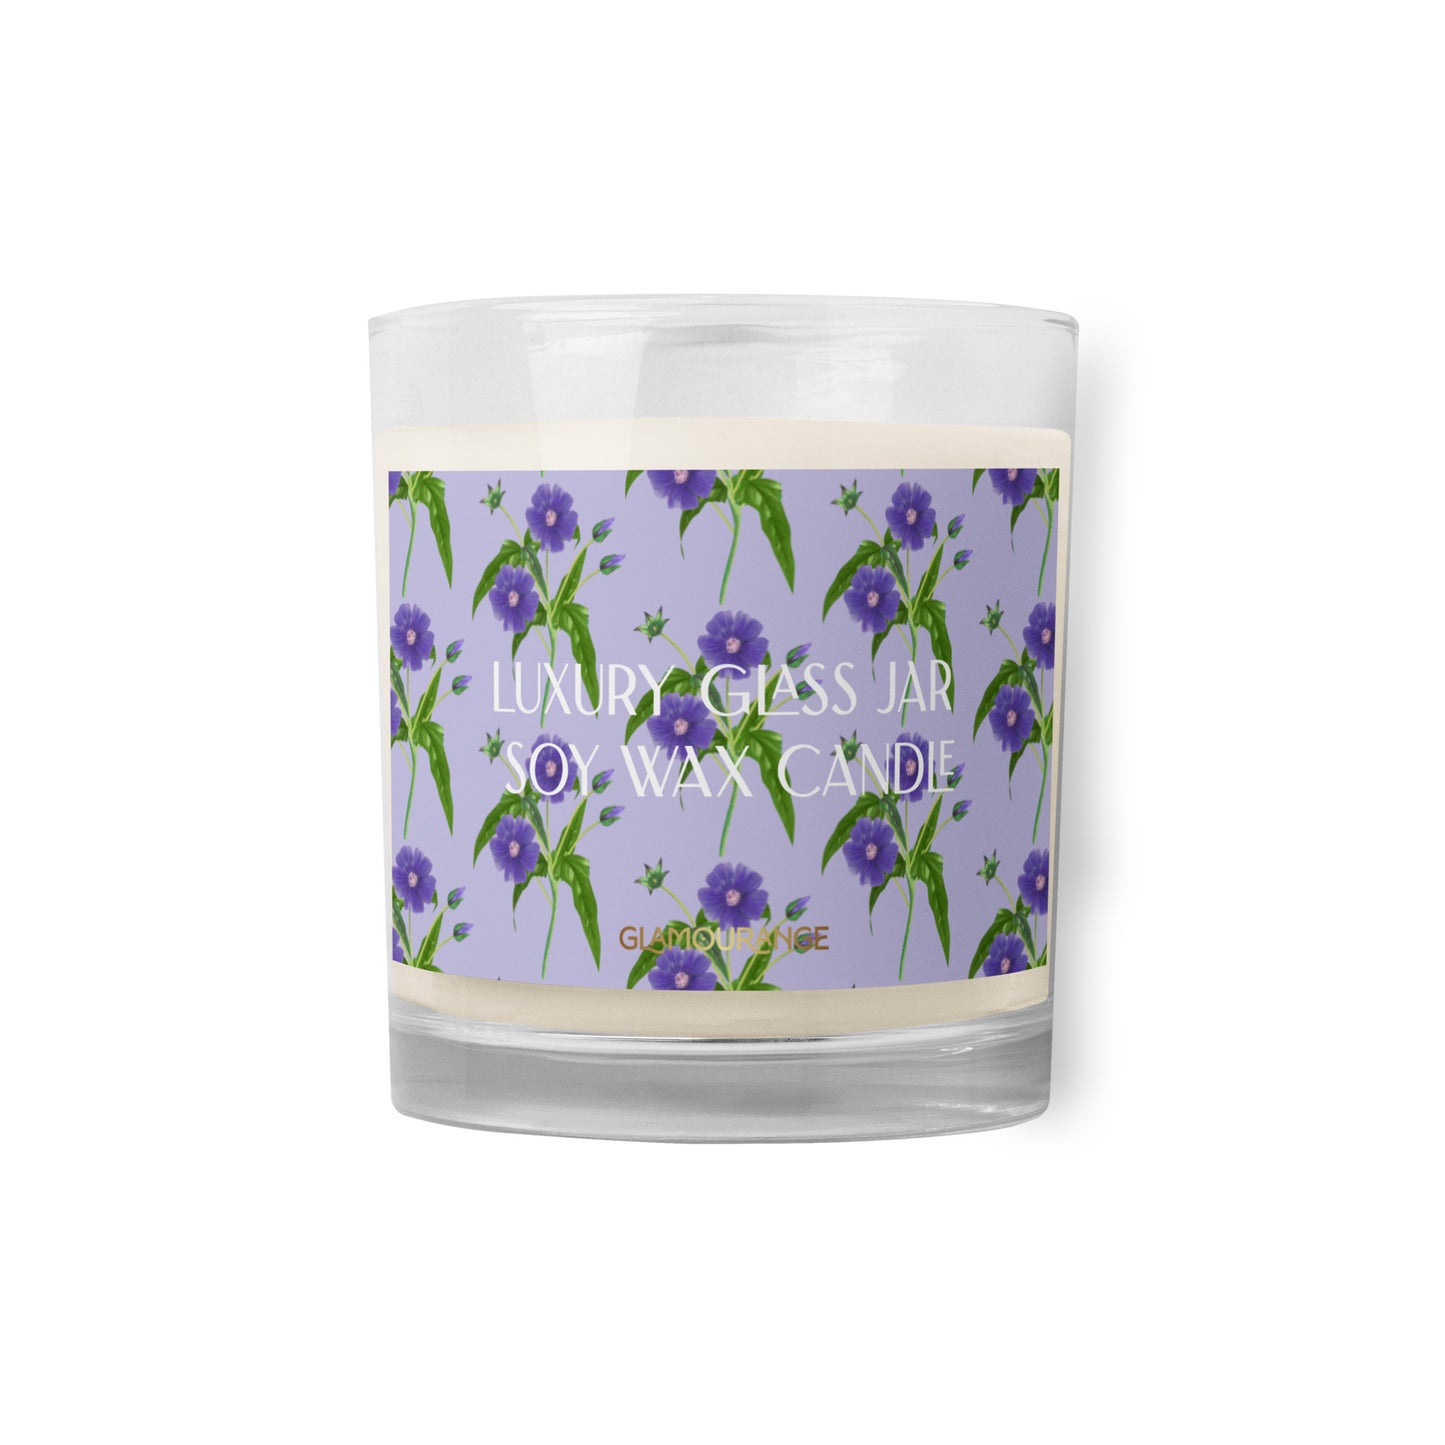 Glass Jar Soy Wax Candle (Calming Vivid Nature - Label 0025)